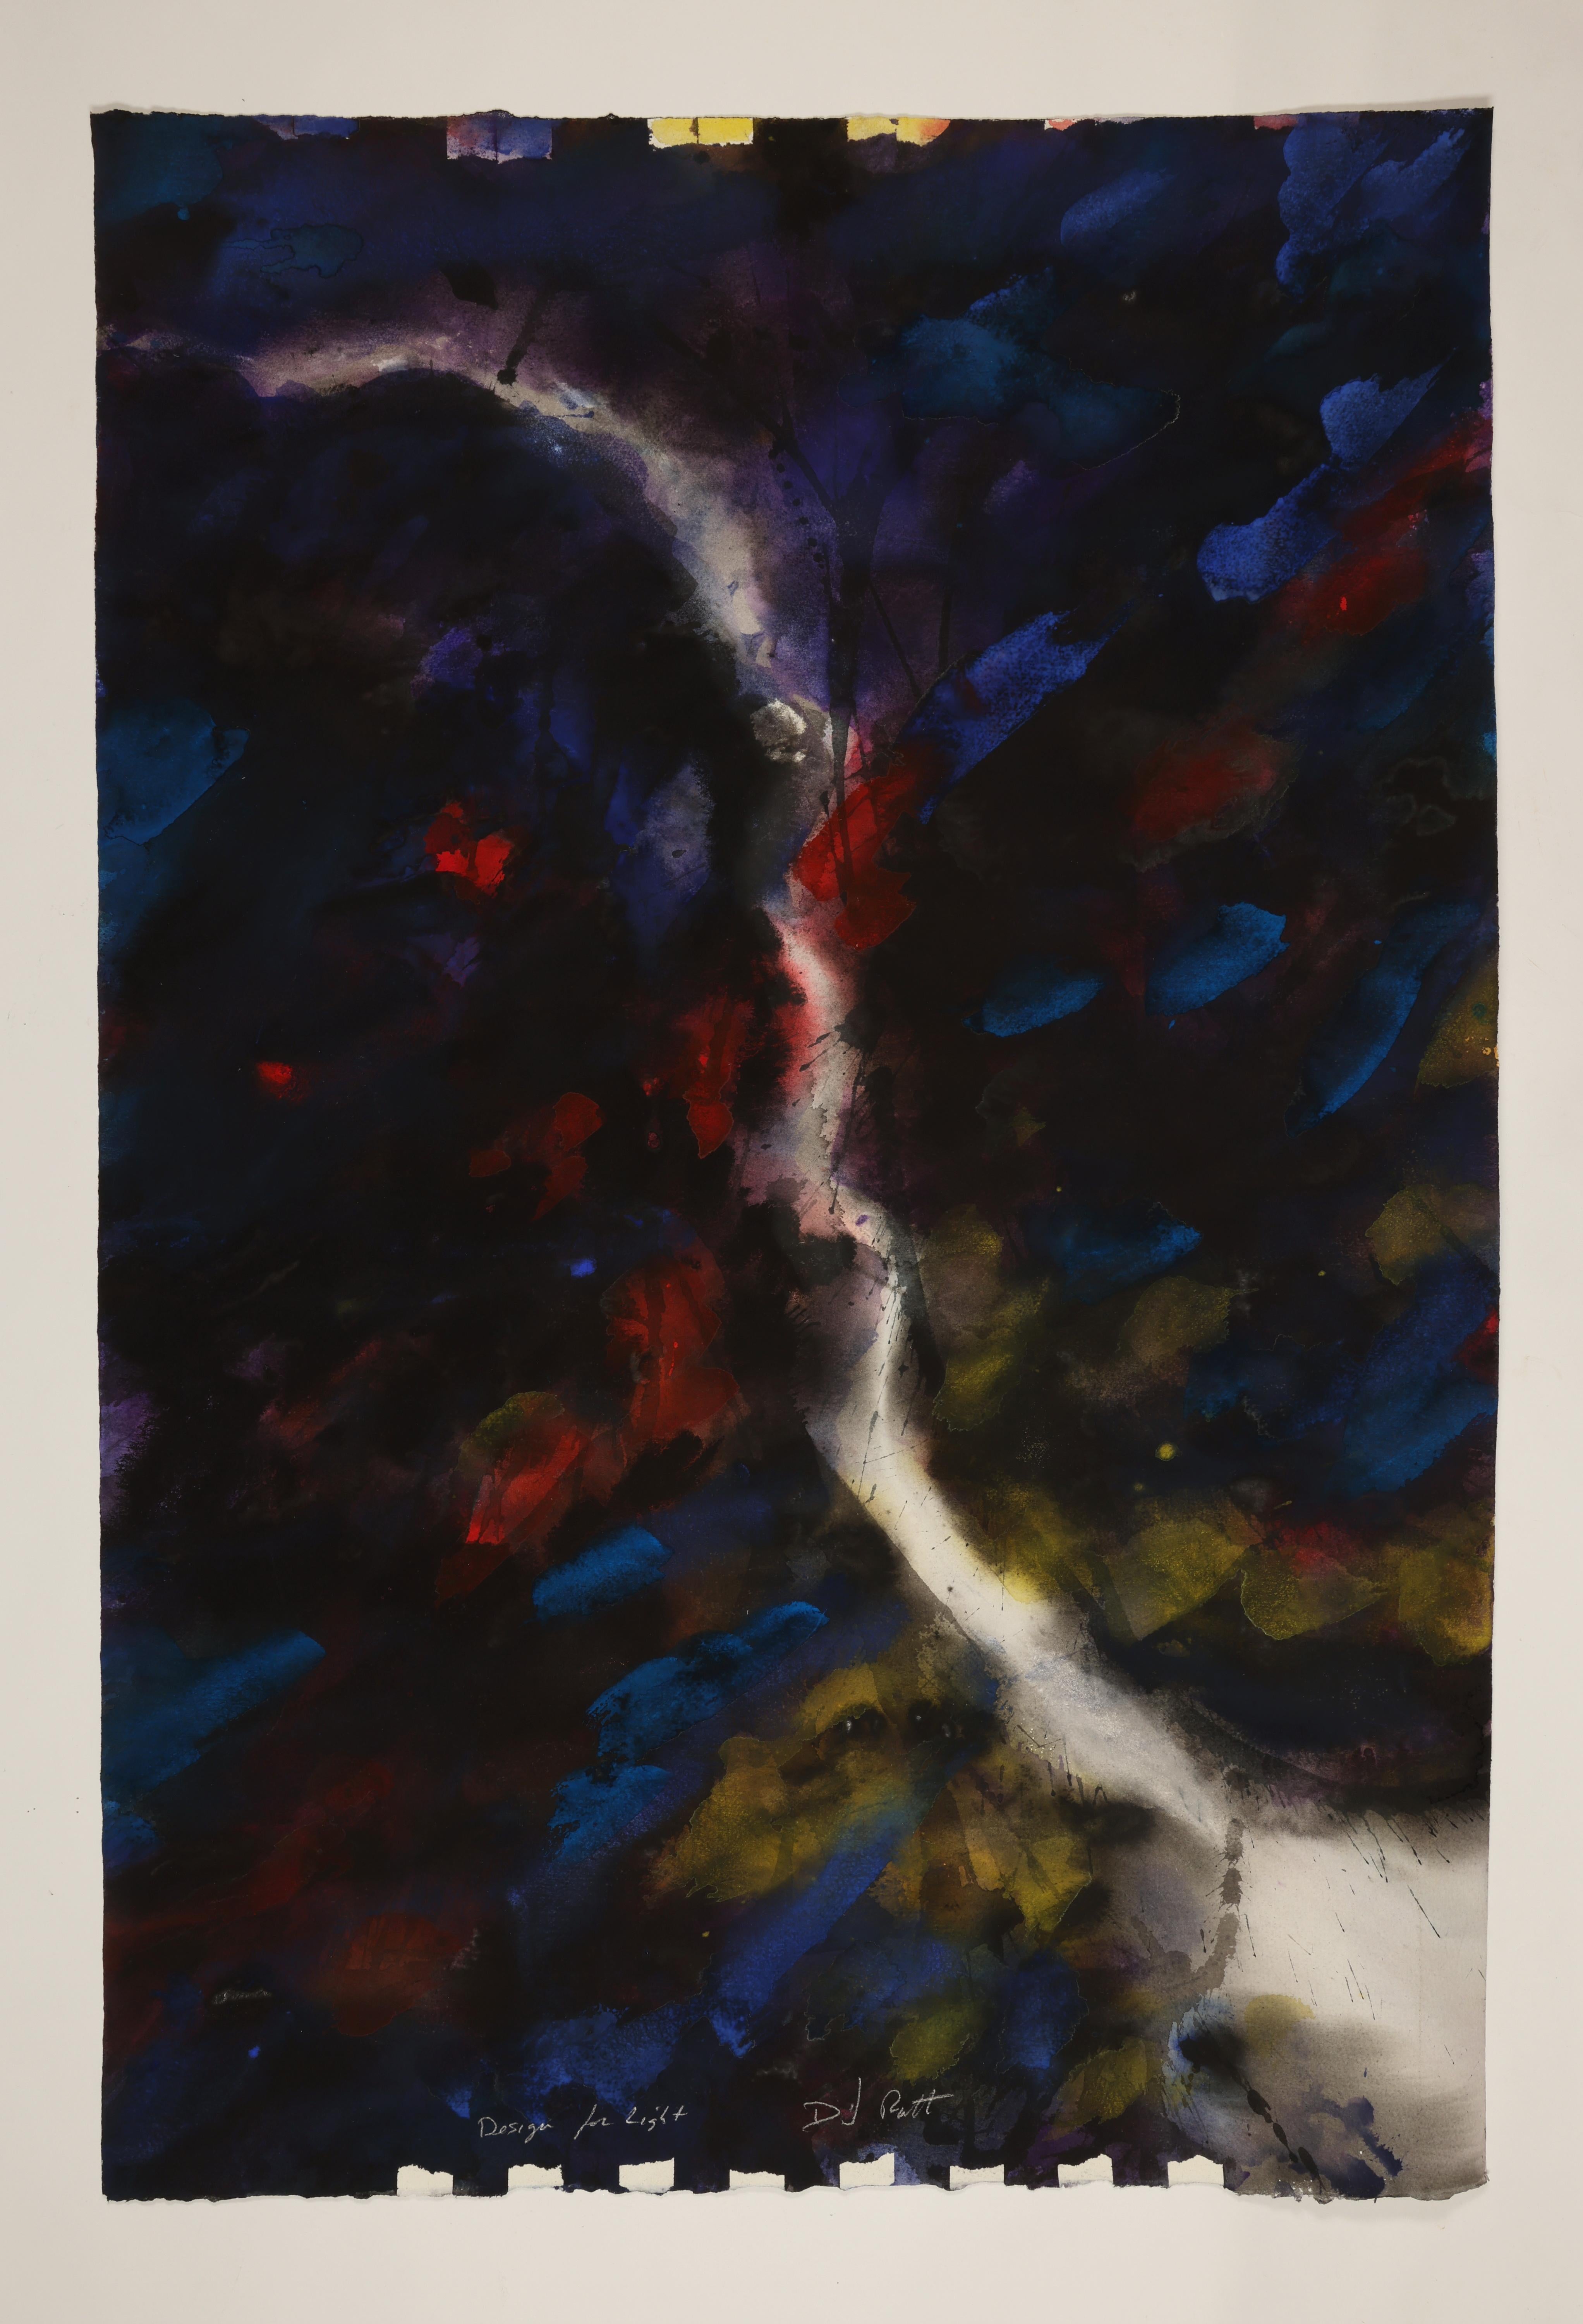 Contemporary Watercolor Painting, 'Design for Light', c. 2000 by David Ruth